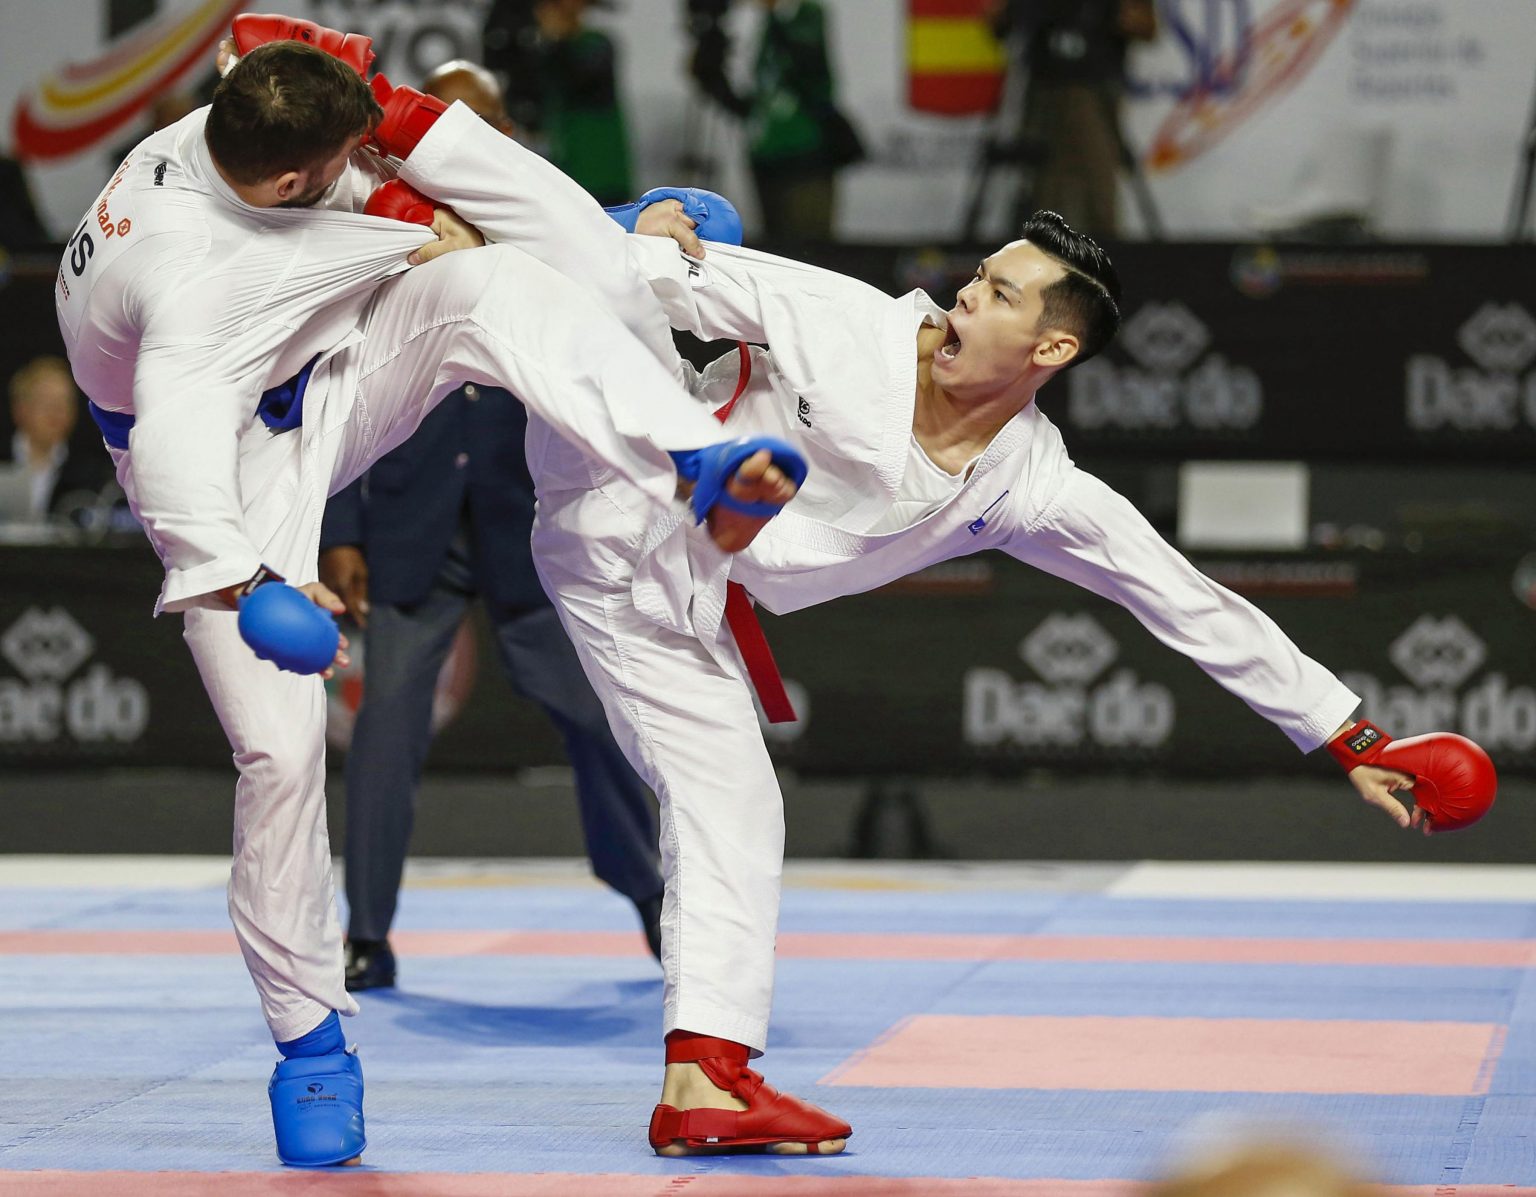 The JAPAN Forward Guide to Karate in the 2020 Olympics